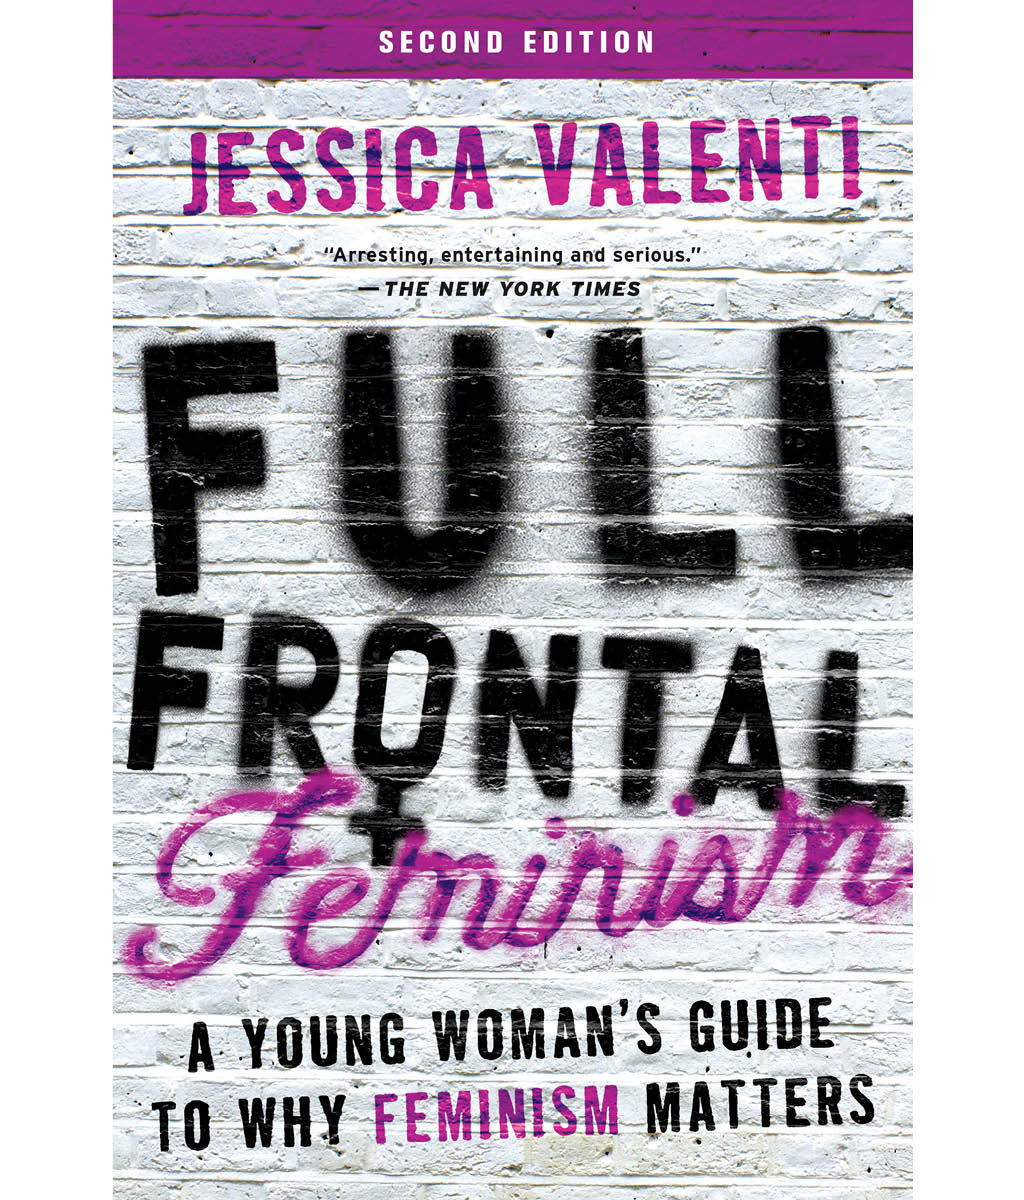 Full frontal feminism: a young woman's guide to why feminism matters by Jessica Valenti